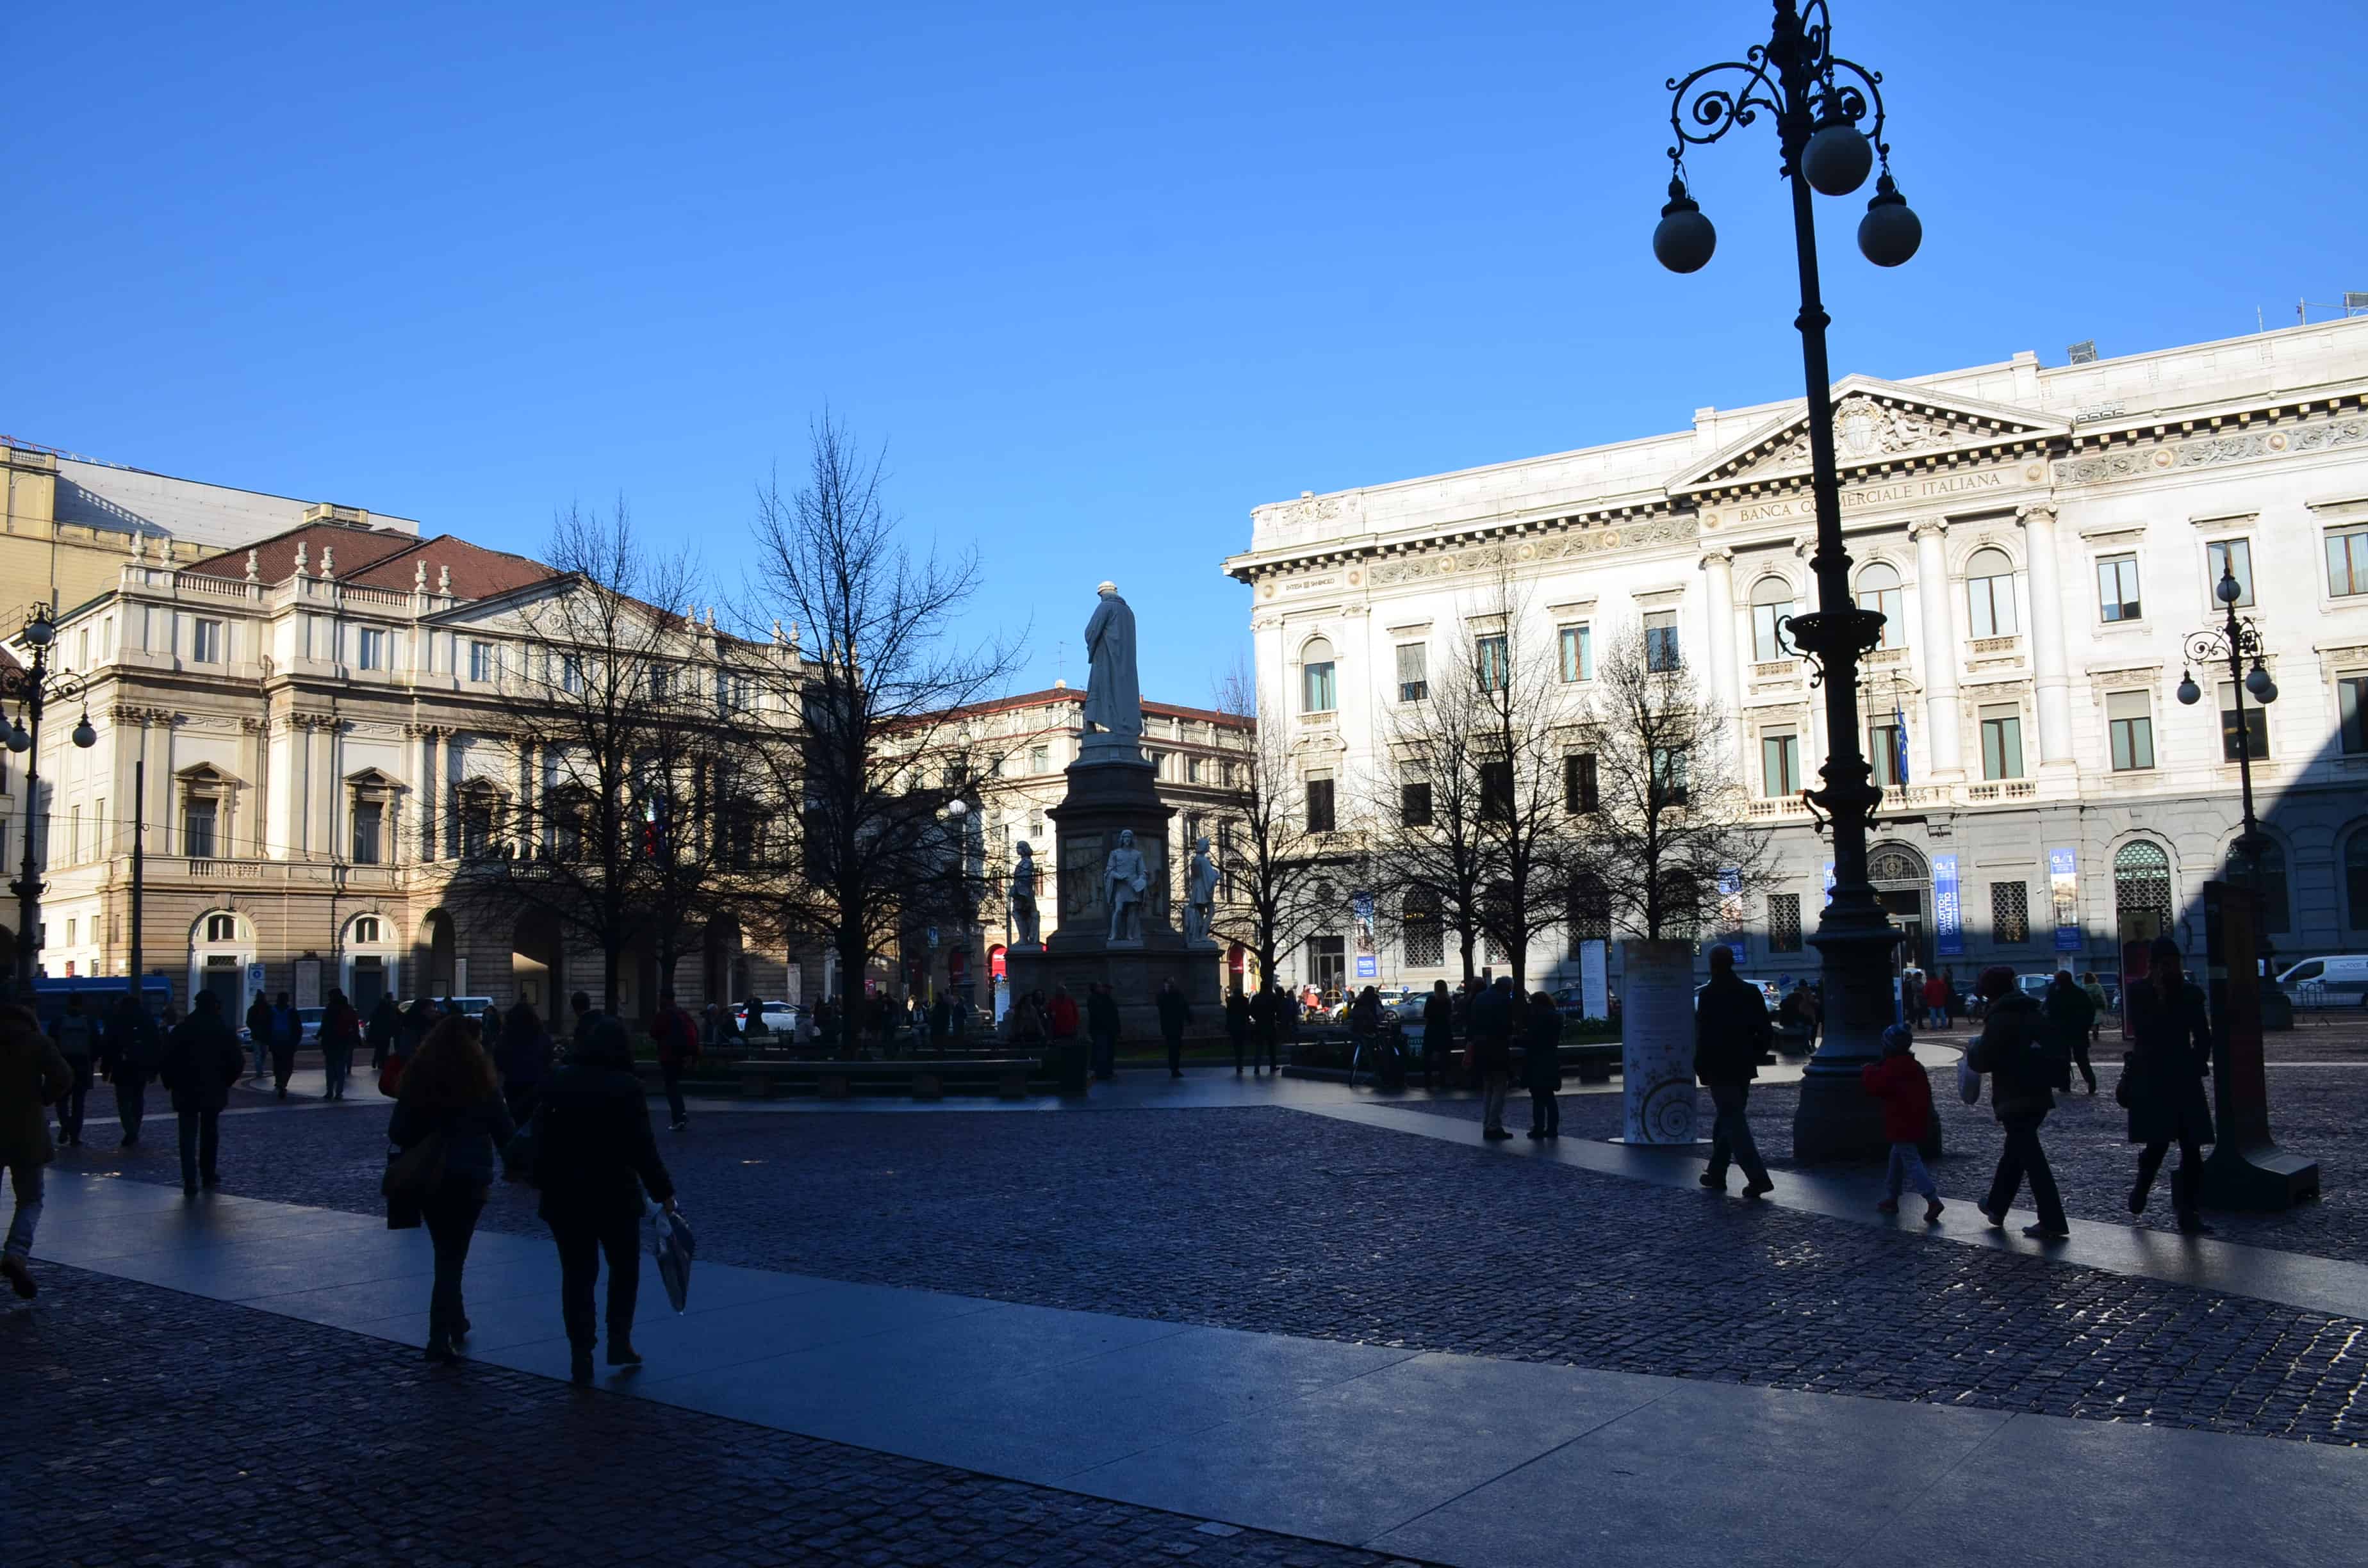 La Scala (left) and Italian Commerical Bank Palace (right) on Piazza della Scala in Milan, Italy